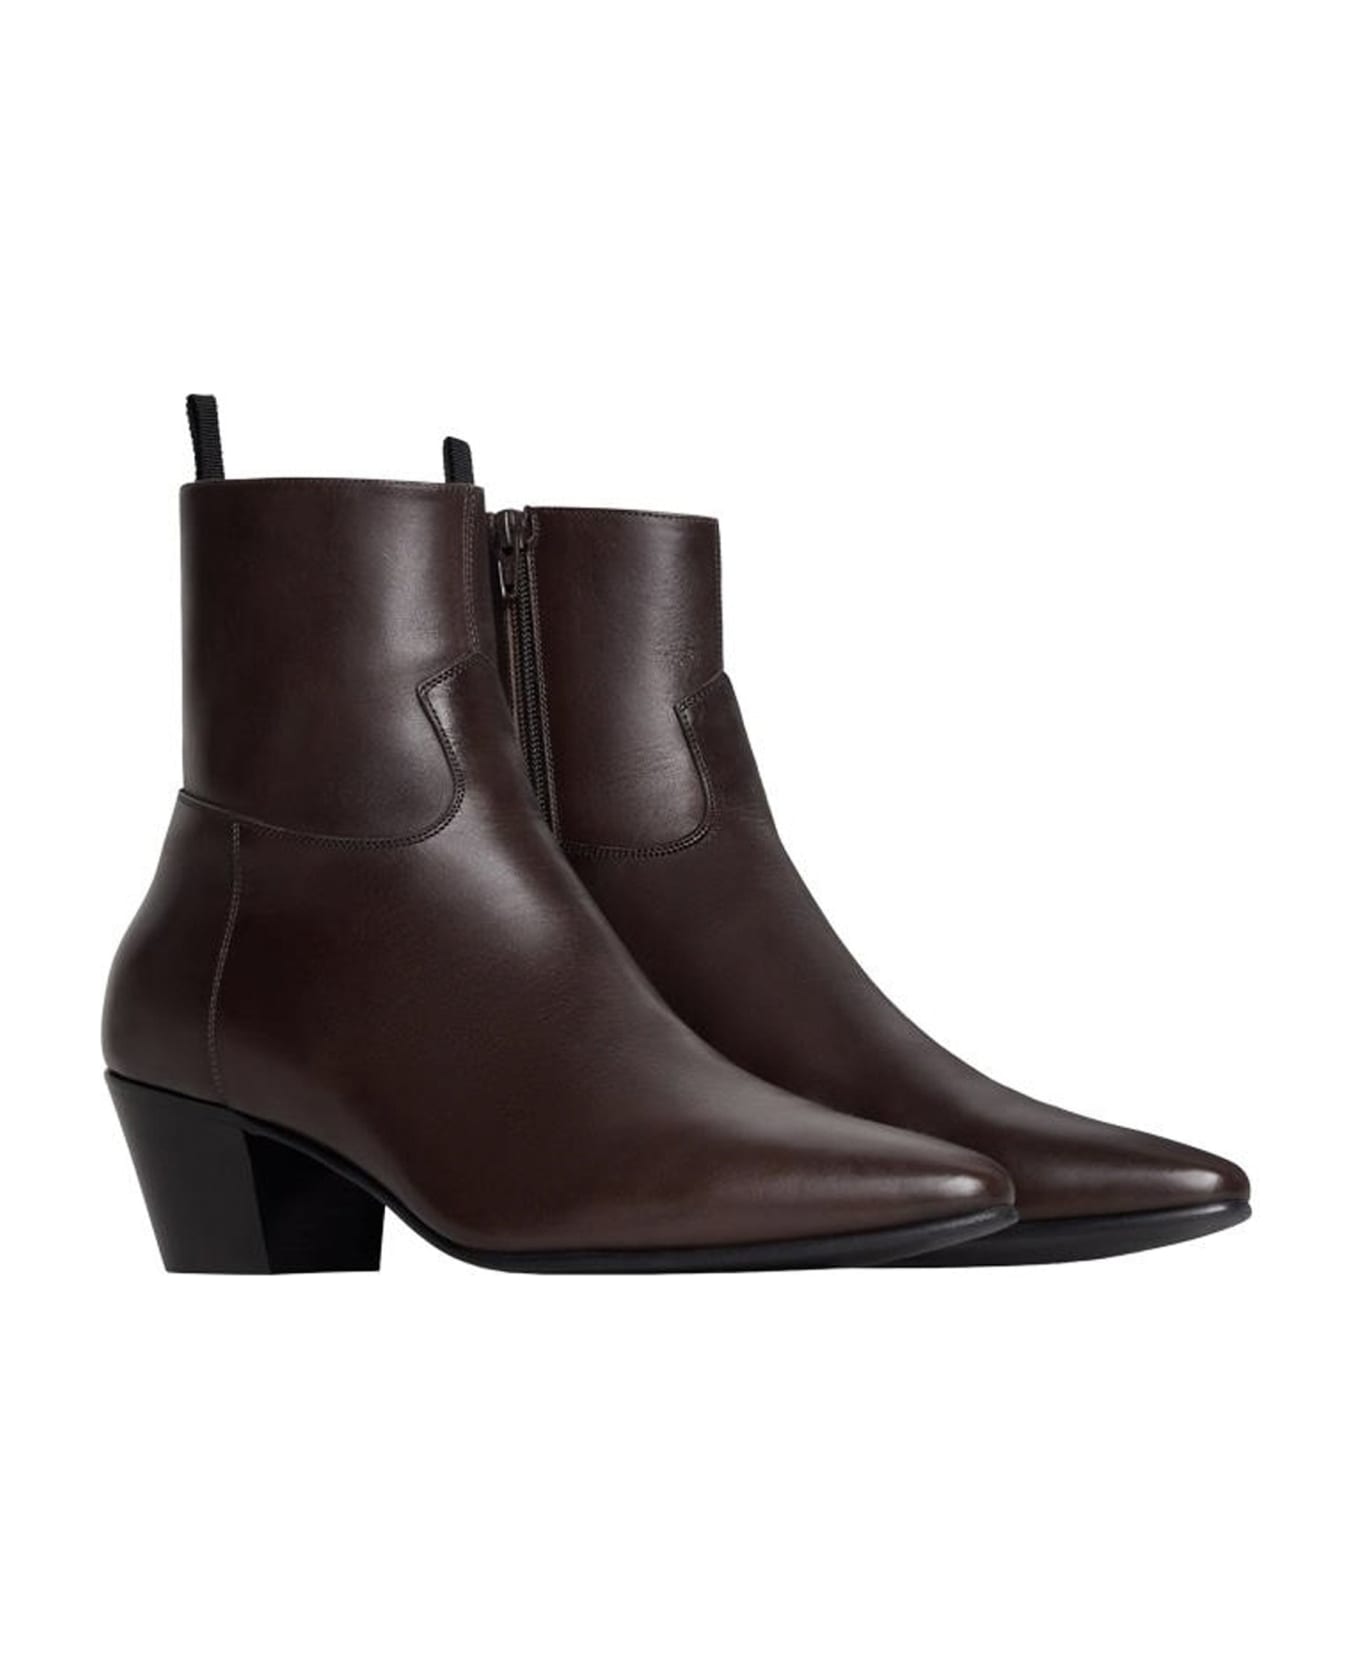 Celine Leather Boots - Brown ブーツ